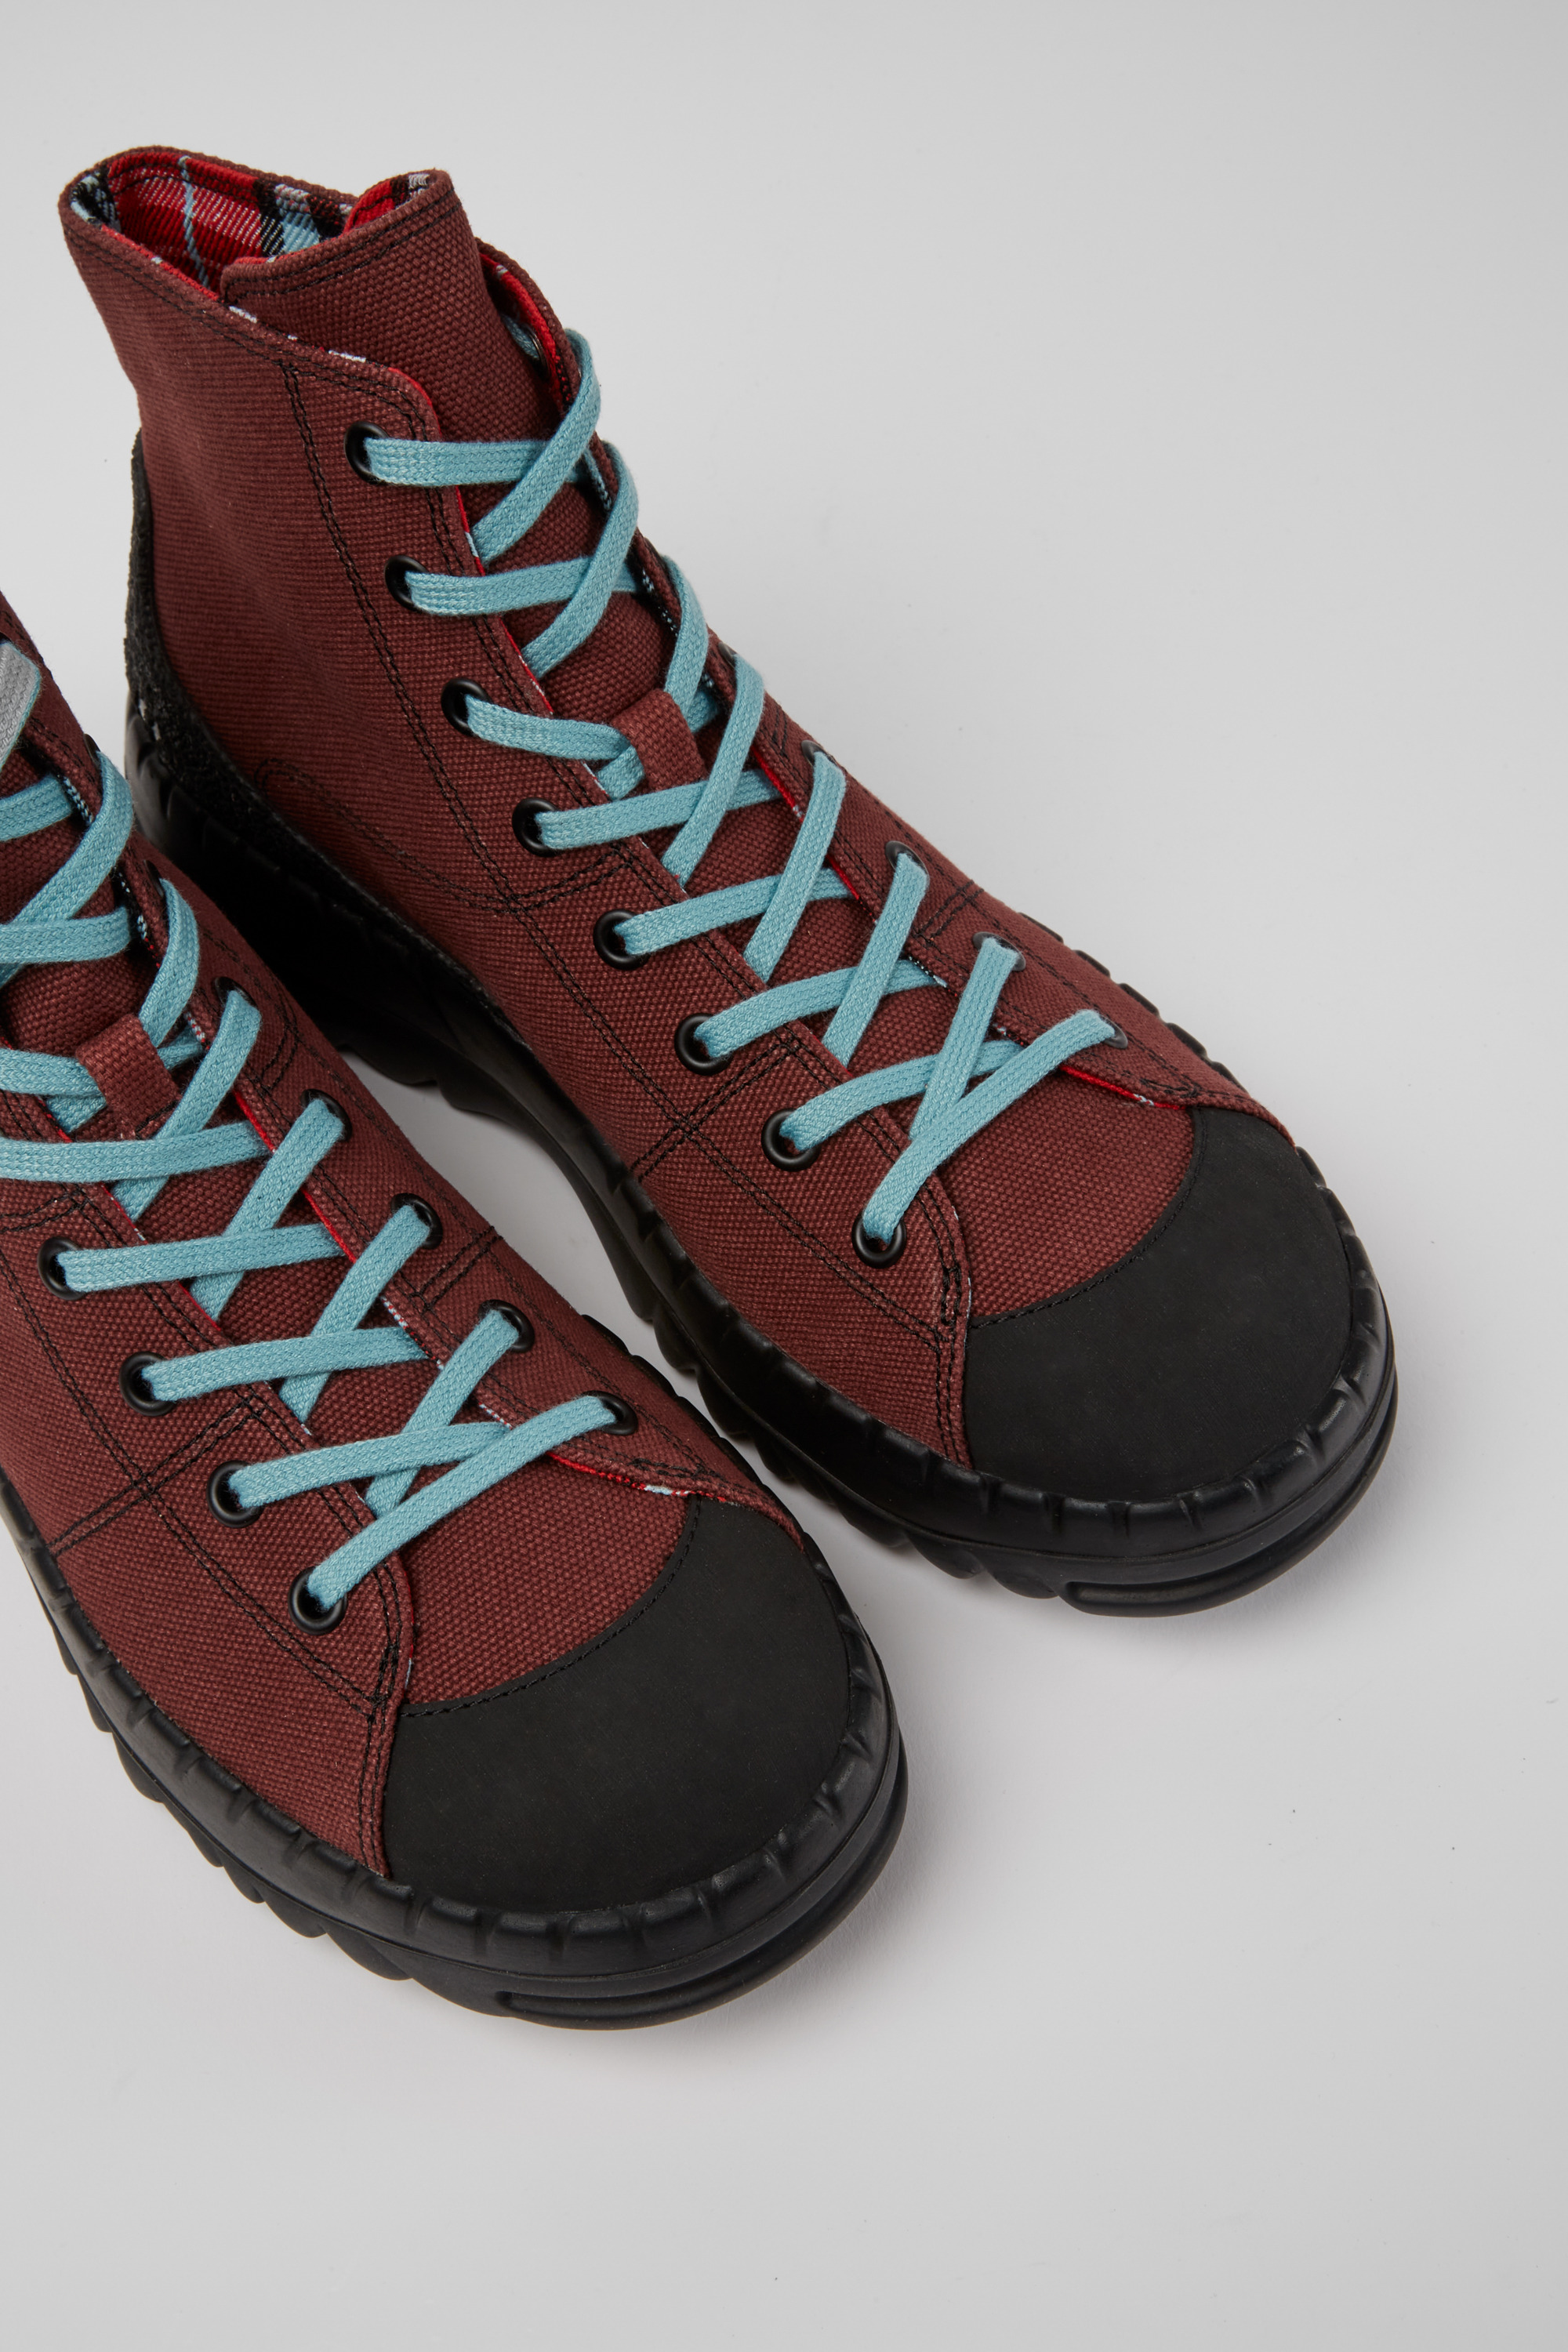 Teix Burgundy Sneakers for Men - Fall/Winter collection - Camper USA